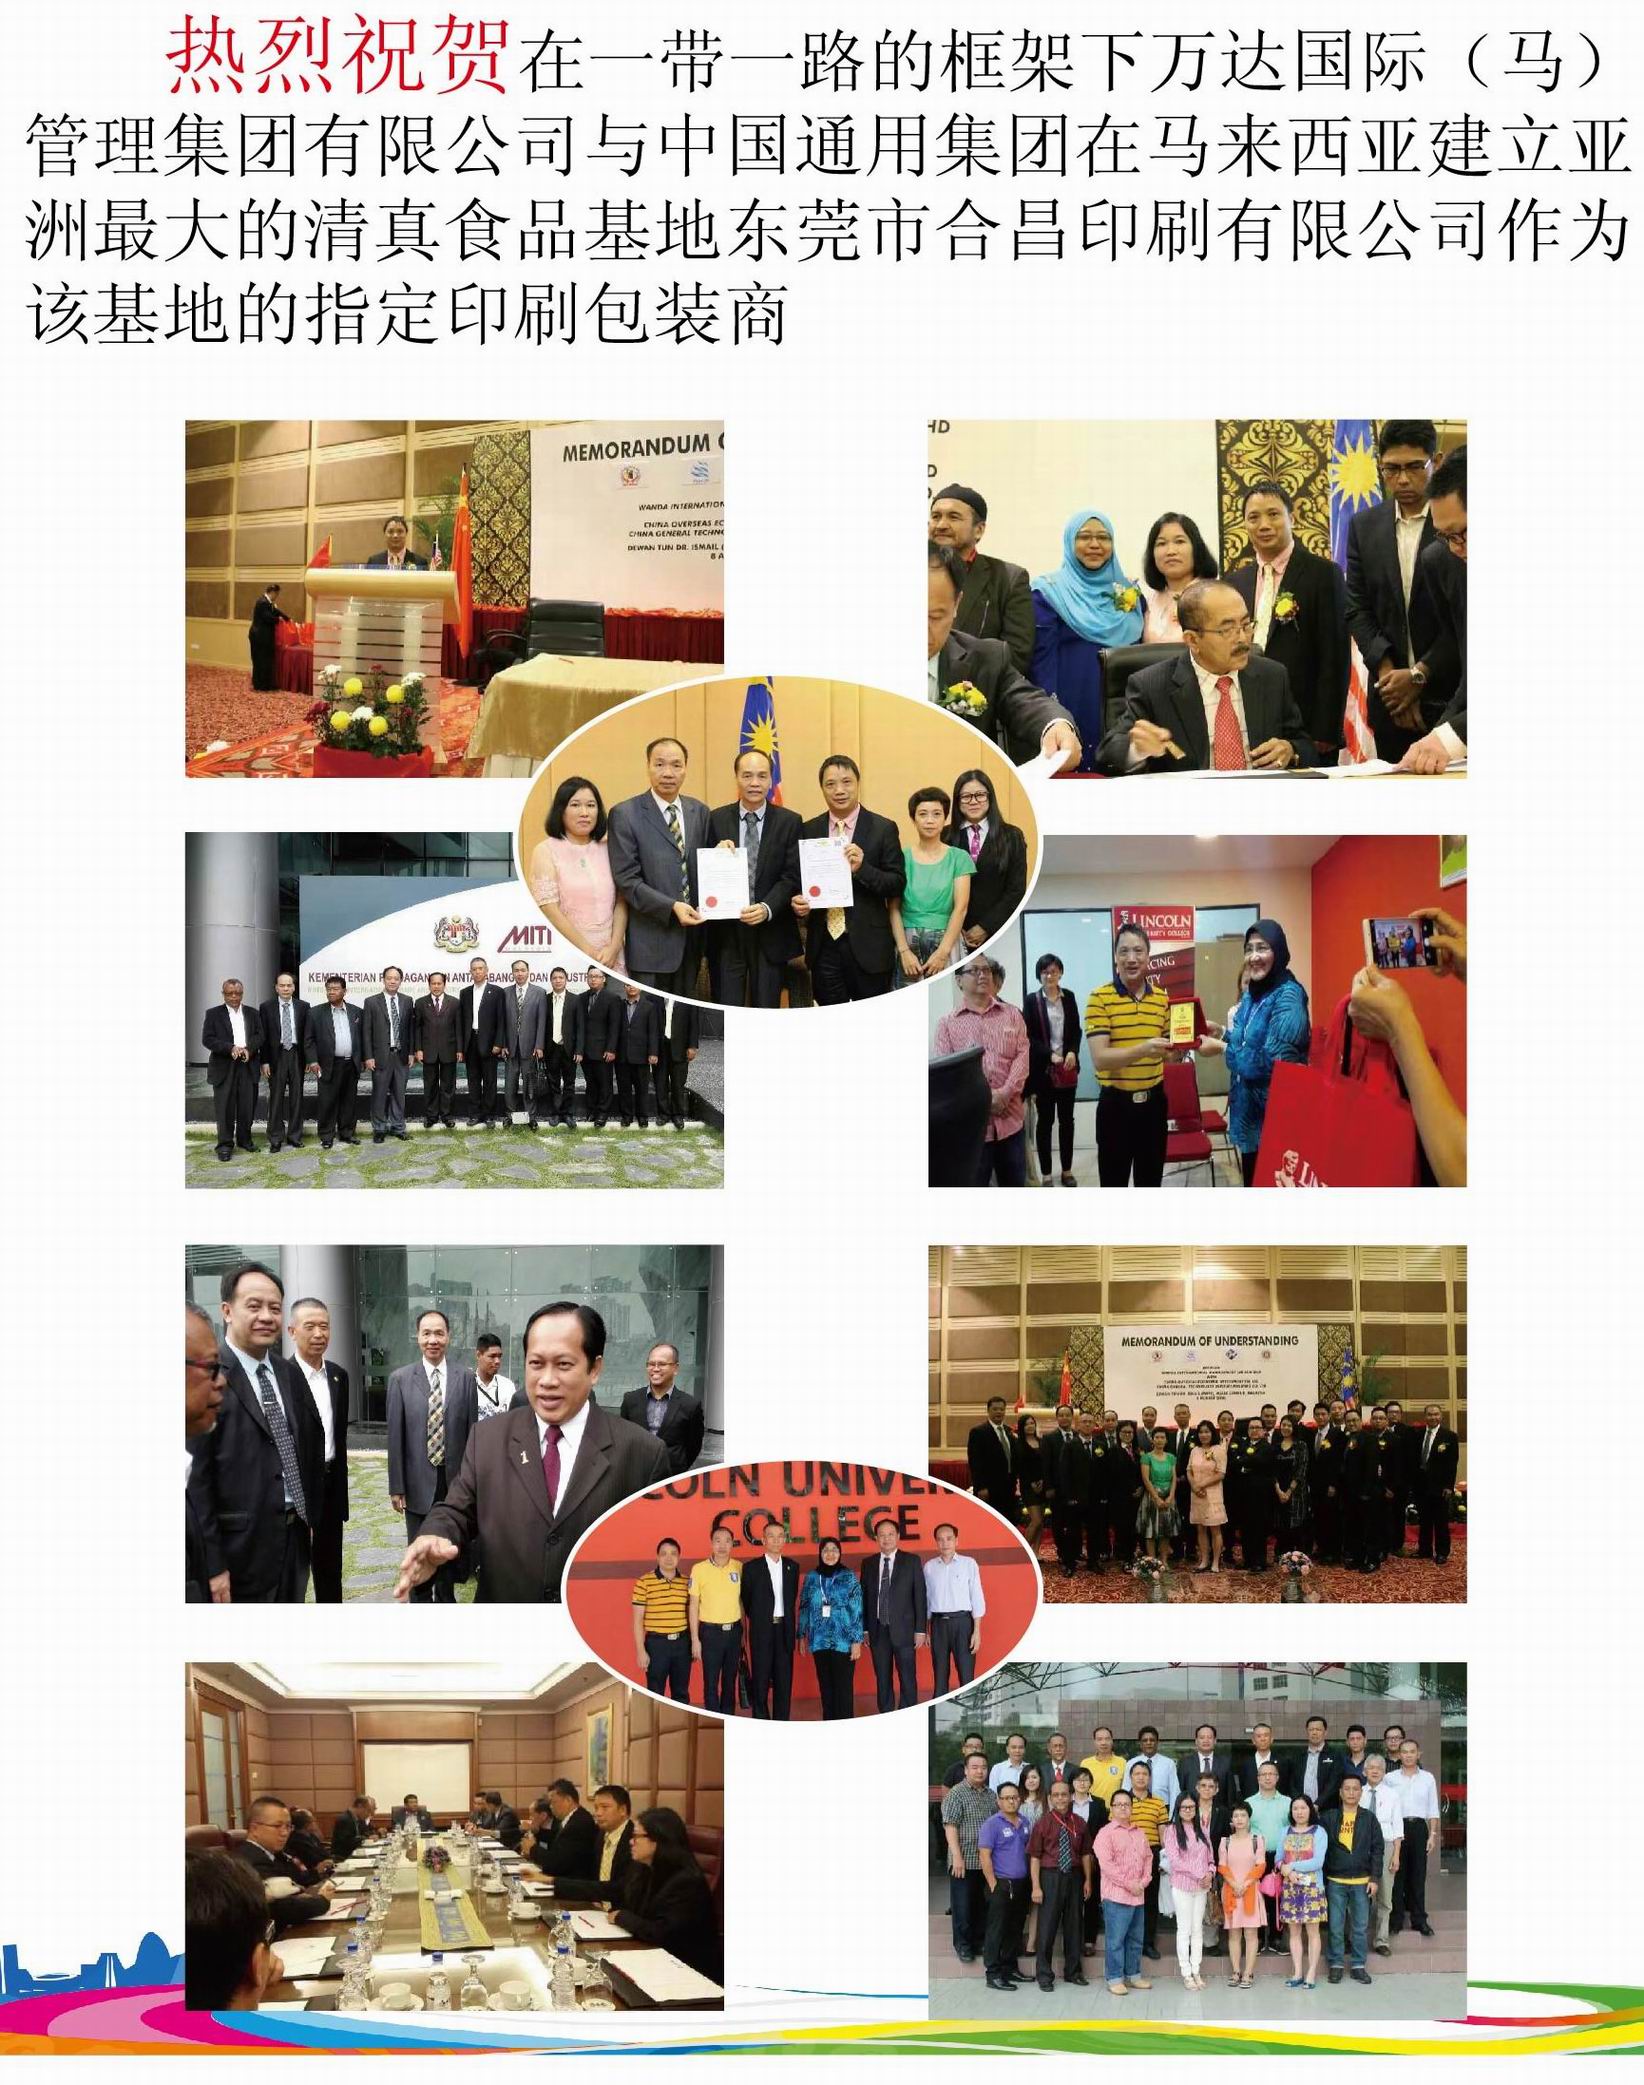 Congratulations to Wanda International (Malaysia) Management Group Co., Ltd. and China General Group for establishing Asia ’s largest halal food base in Malaysia under Dongguan ’s Belt and Road Initiative